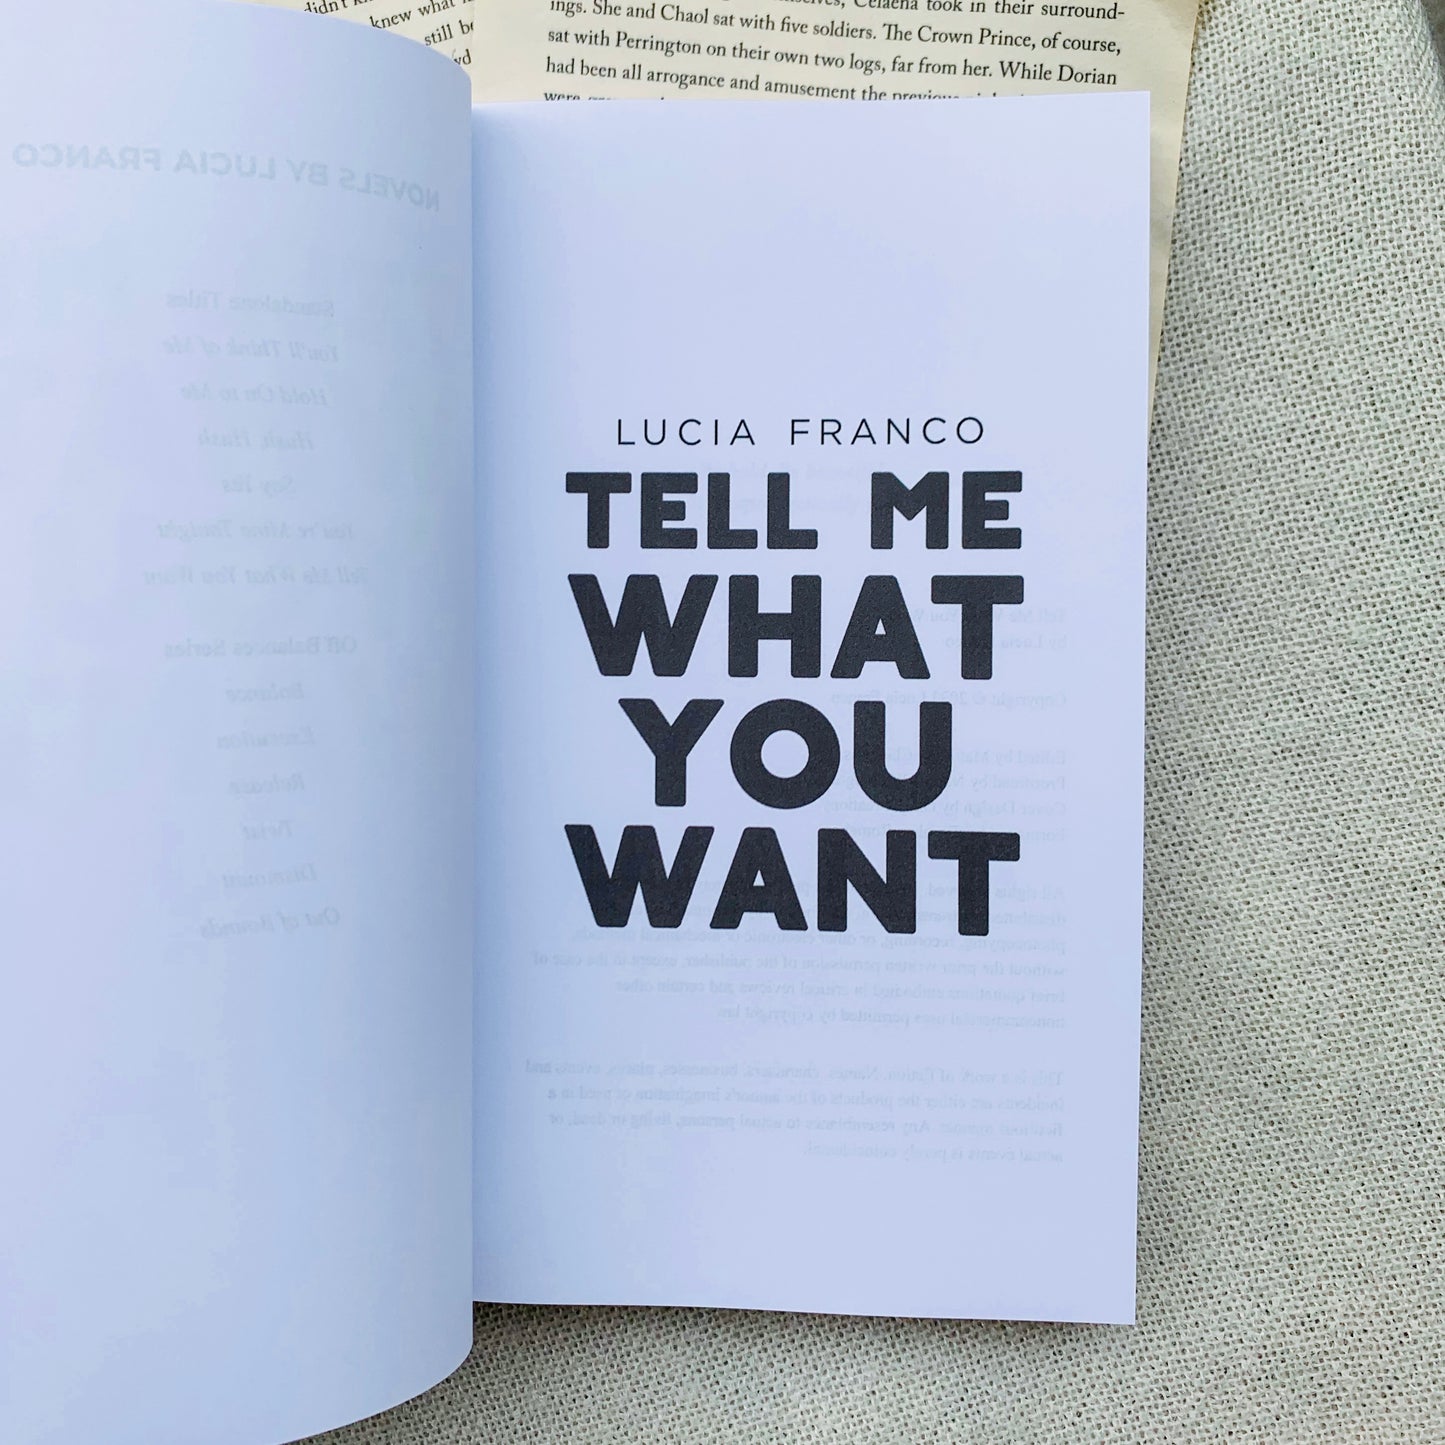 Tell Me What You Want by Lucia Franco